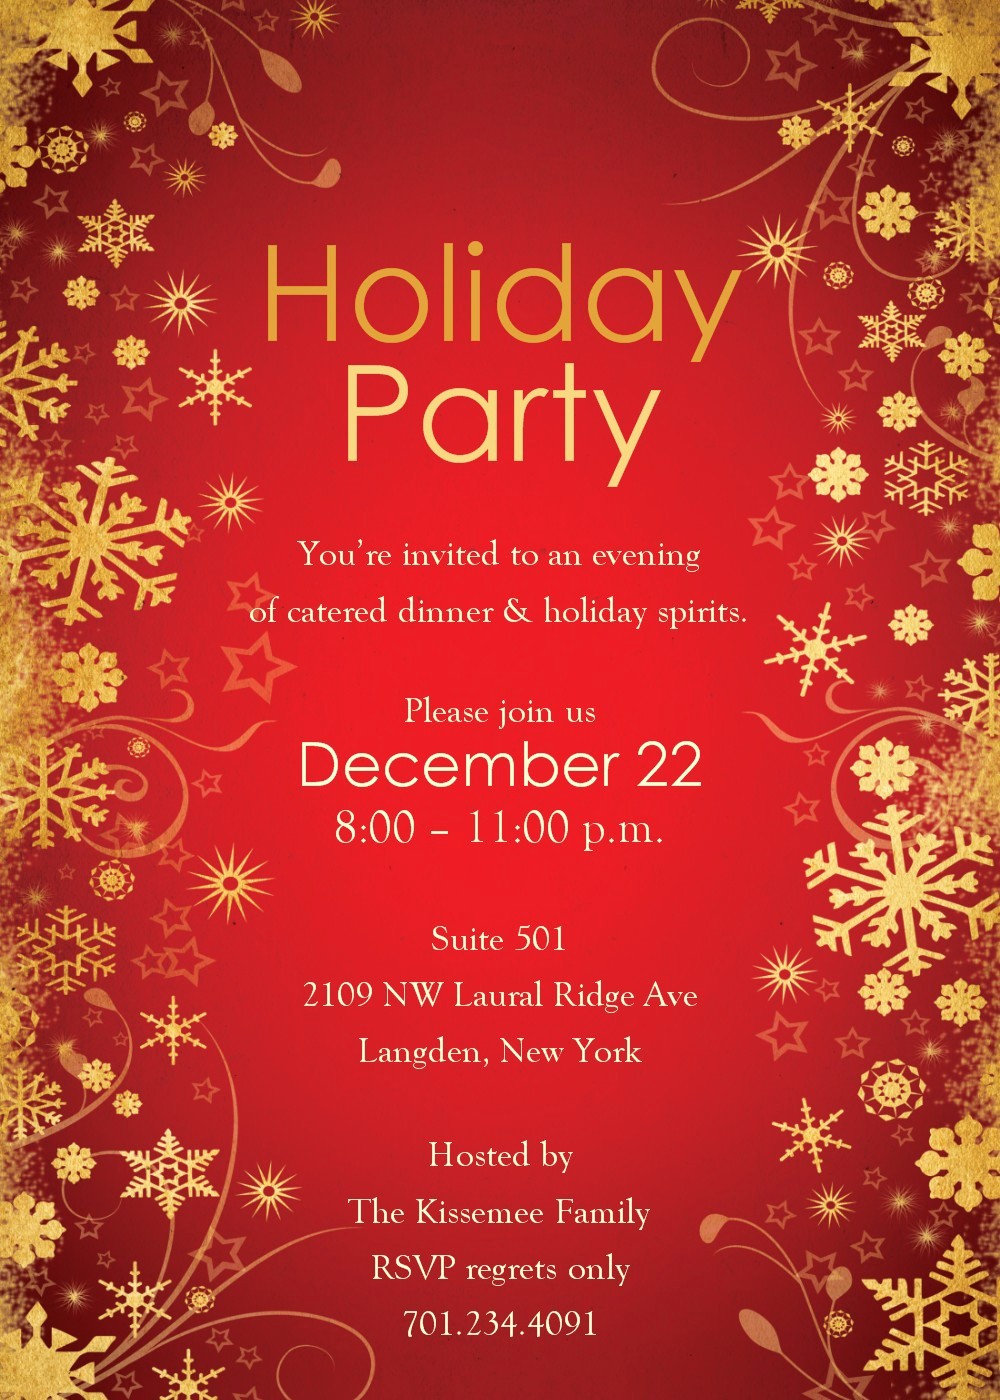 Holiday Party Invitations Template Word Luxury Free Holiday Party Invitation Templates